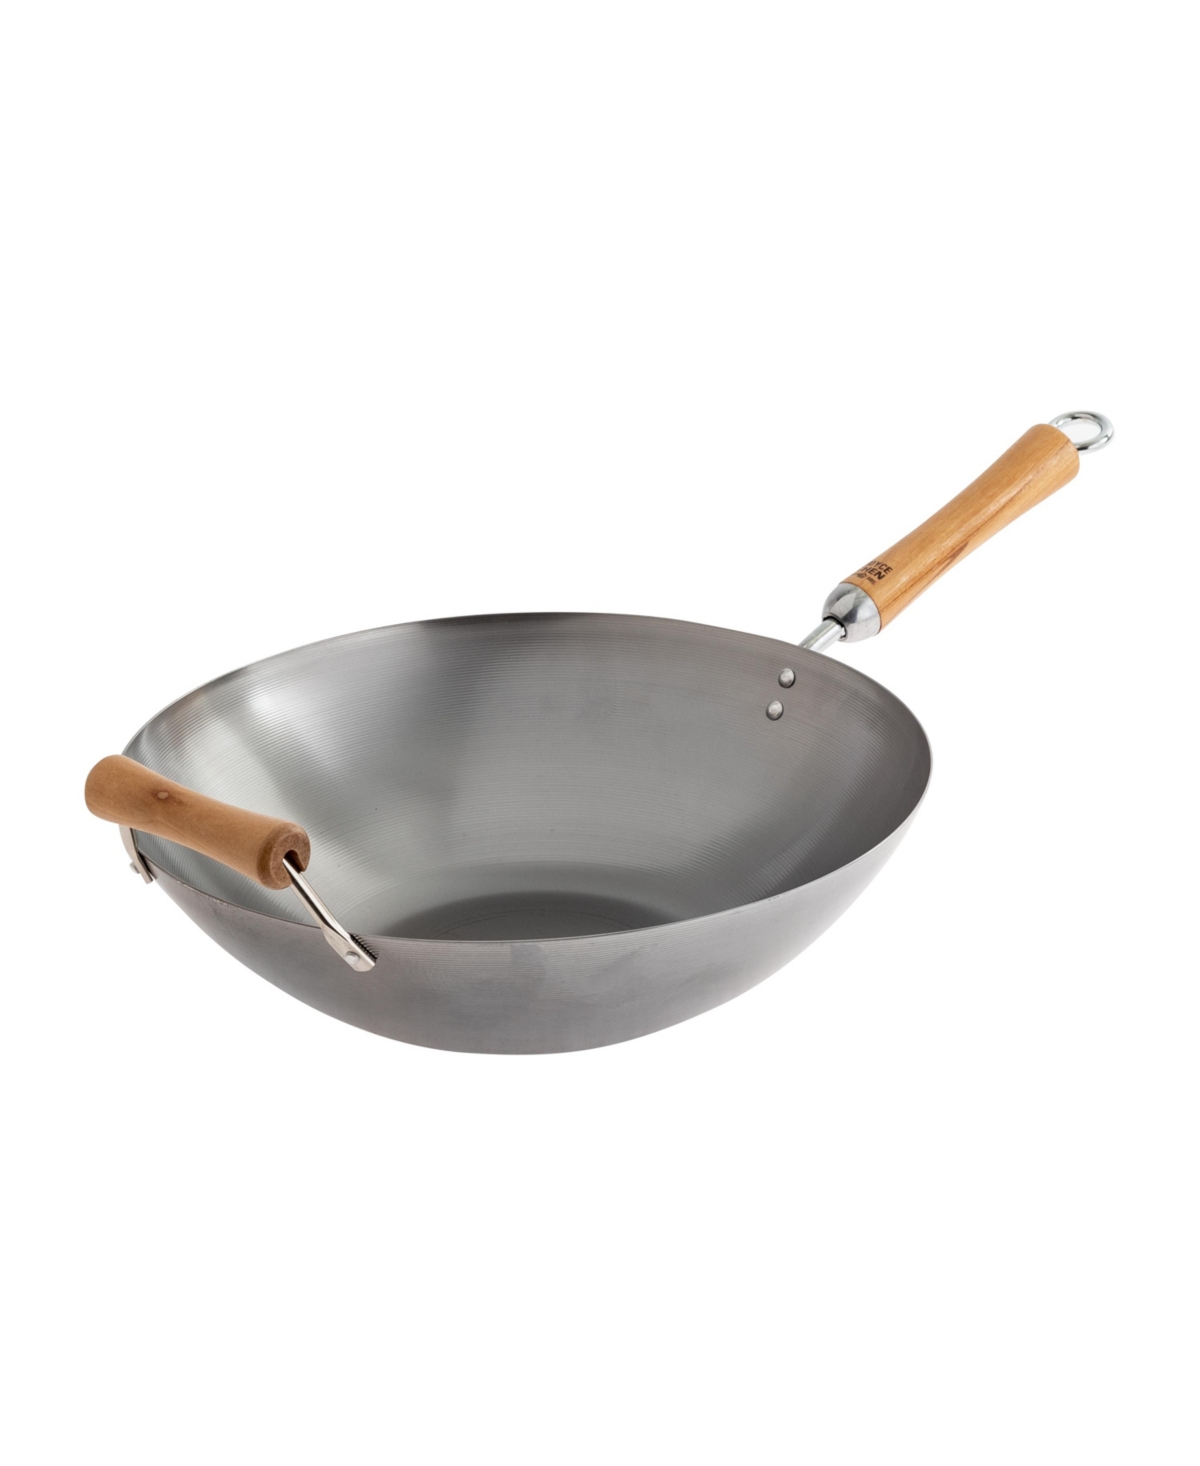 Joyce Chen Classic Series Carbon Steel Wok With Birch Handles, 14" In Silver-tone